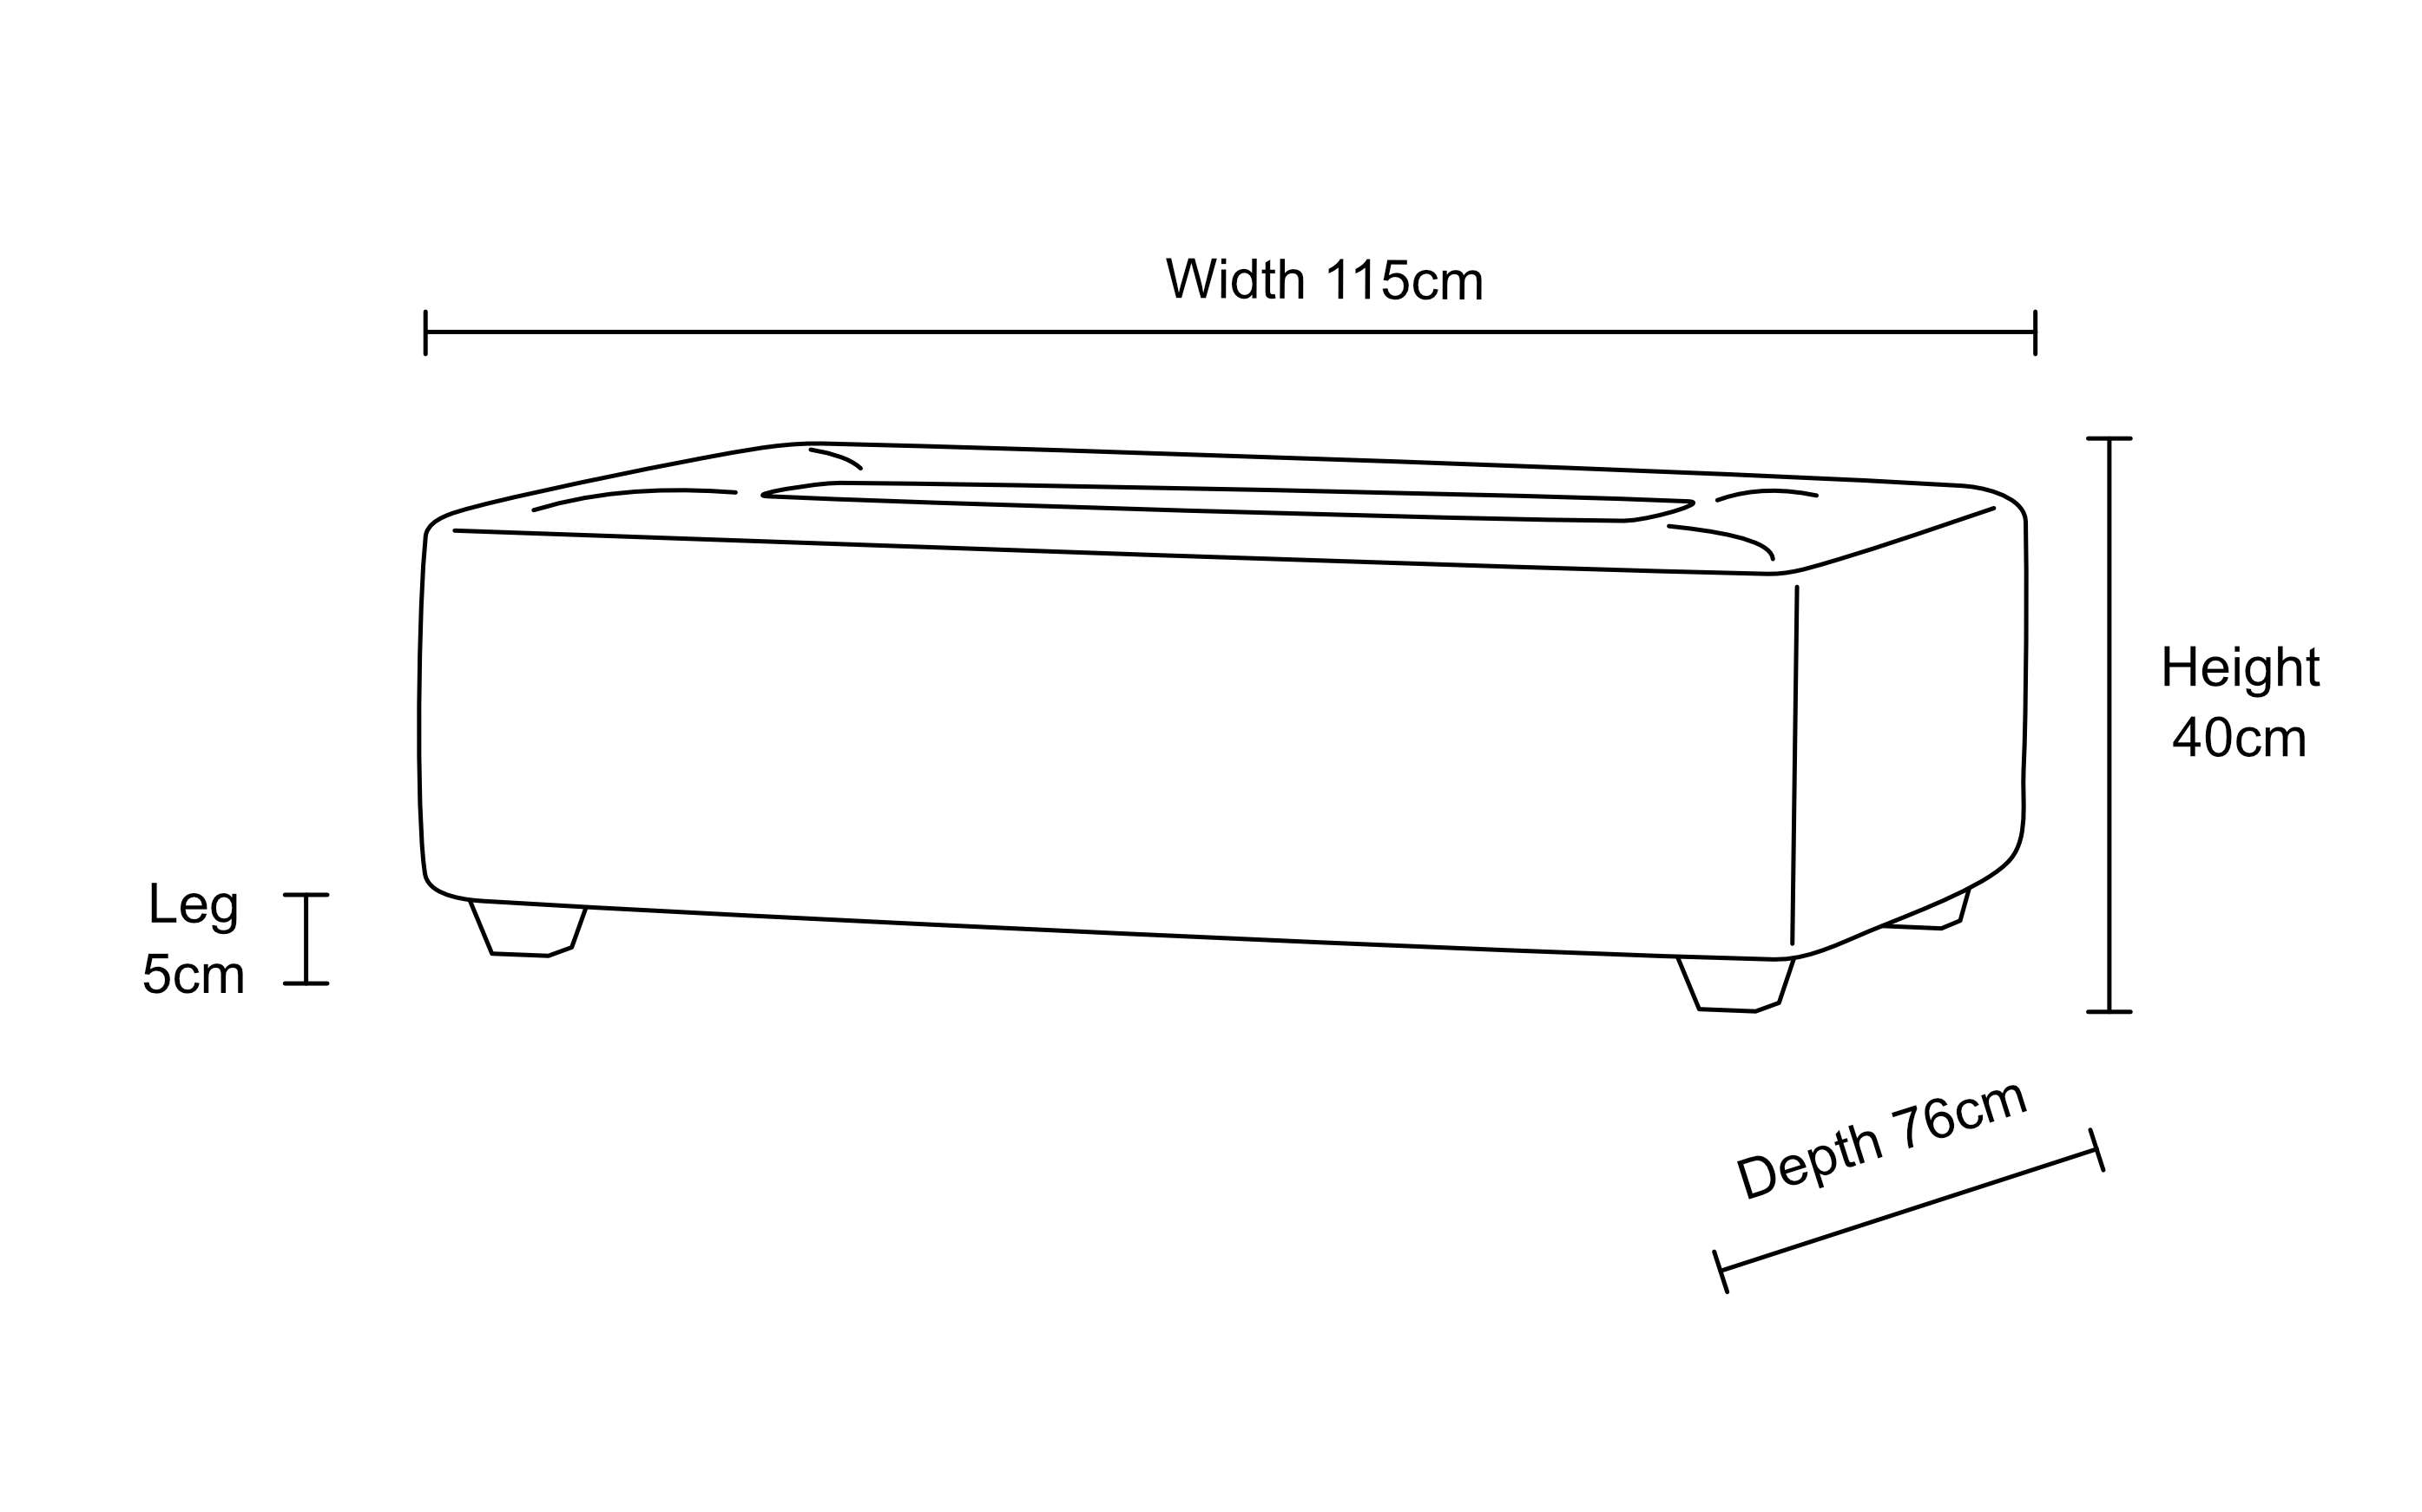 https://www.footstools.co.uk/wp-content/uploads/footstool-coffee-table-45x30-dimensions-1.jpg